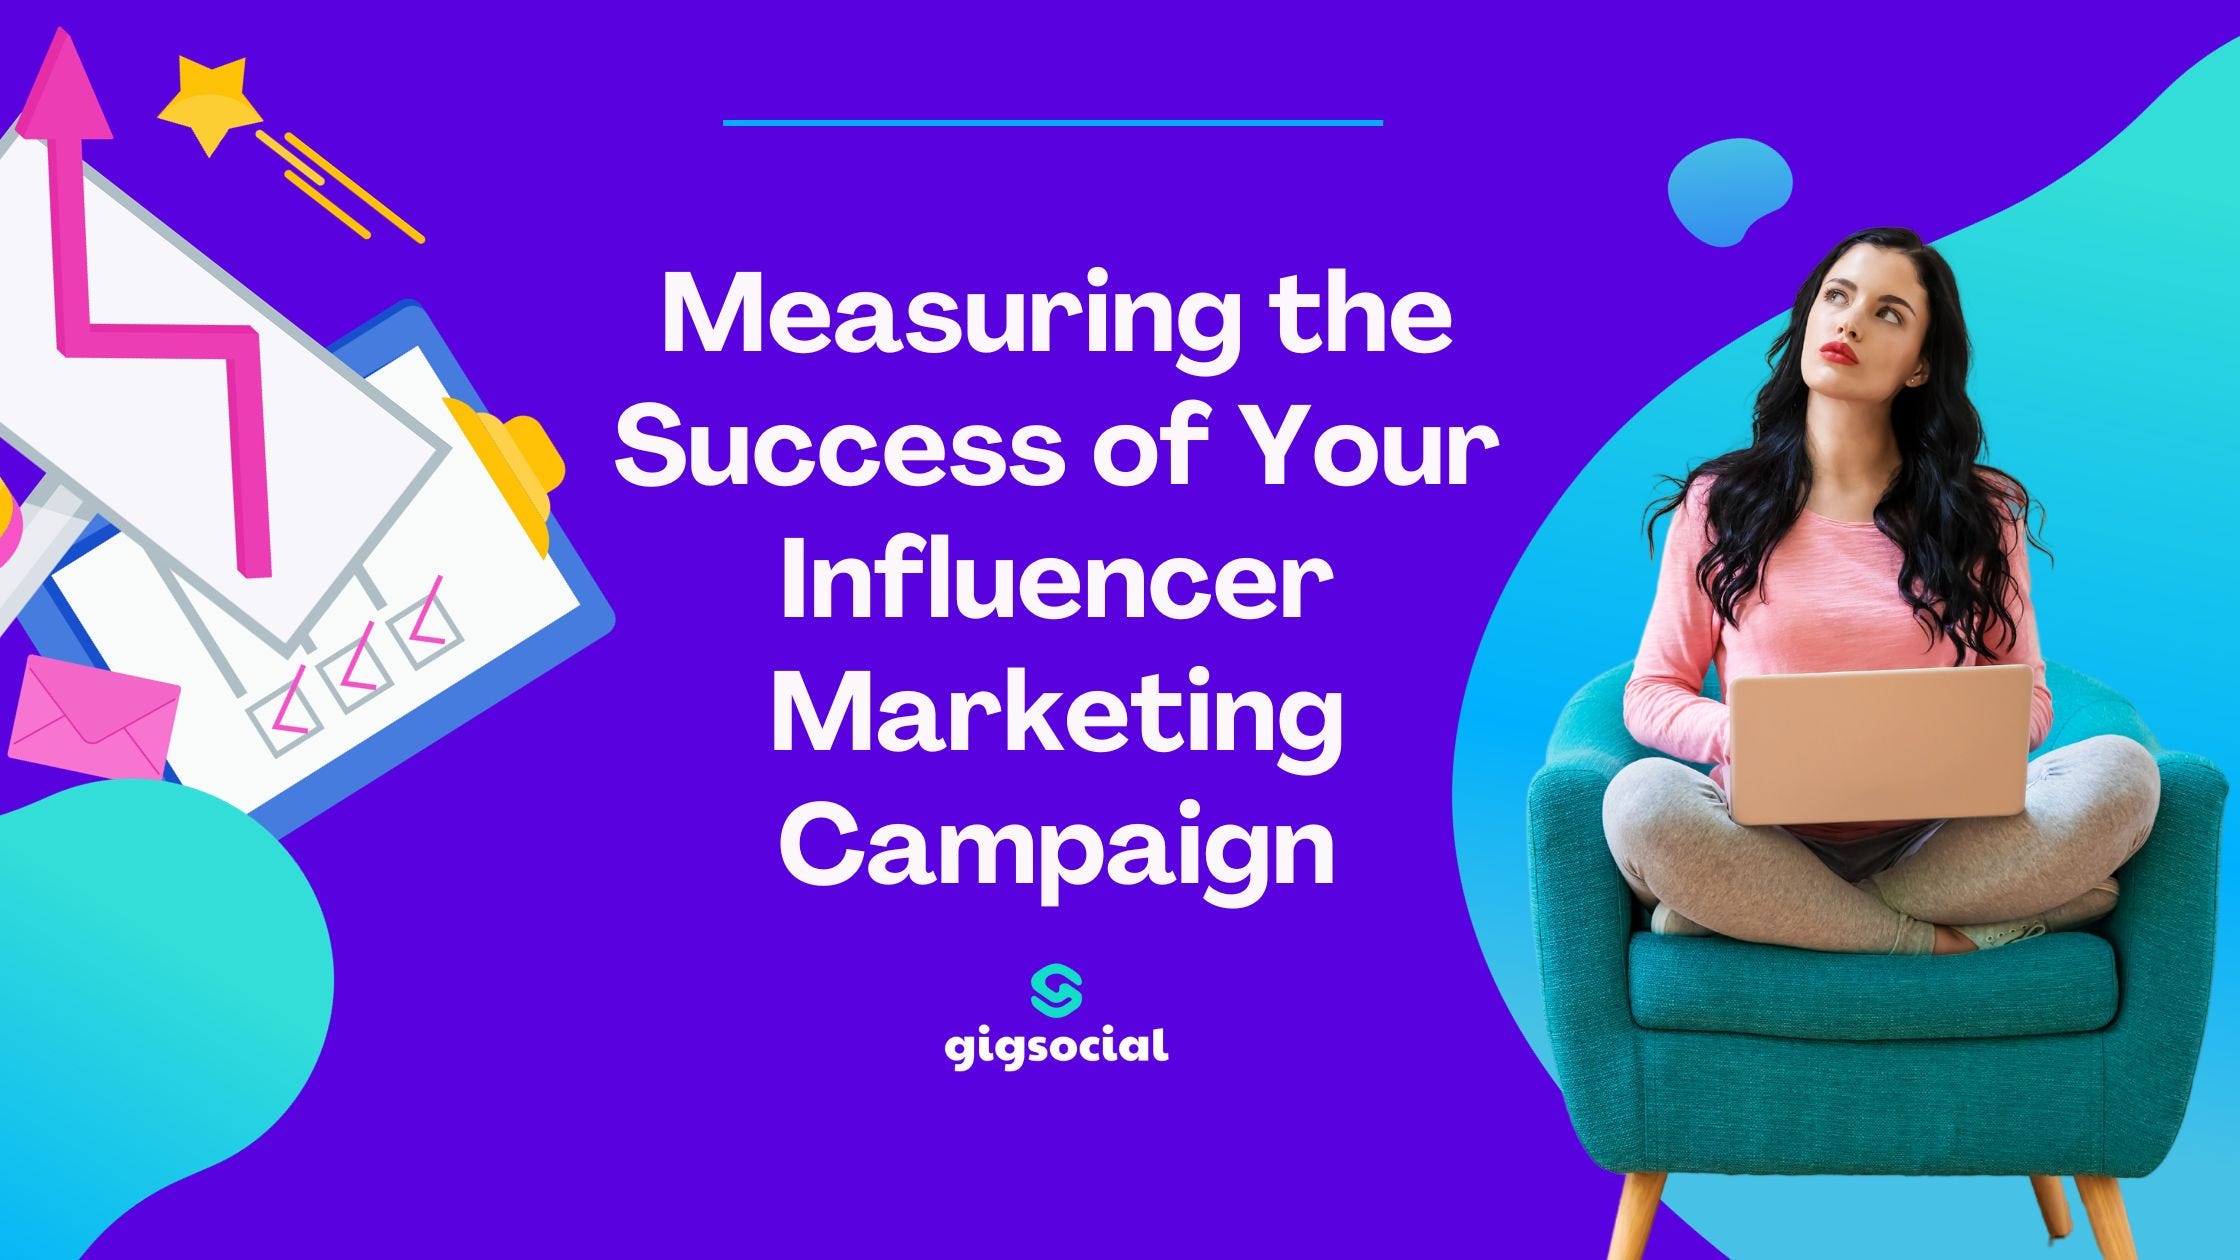 How to measure the success of Your Influencer Marketing Campaign